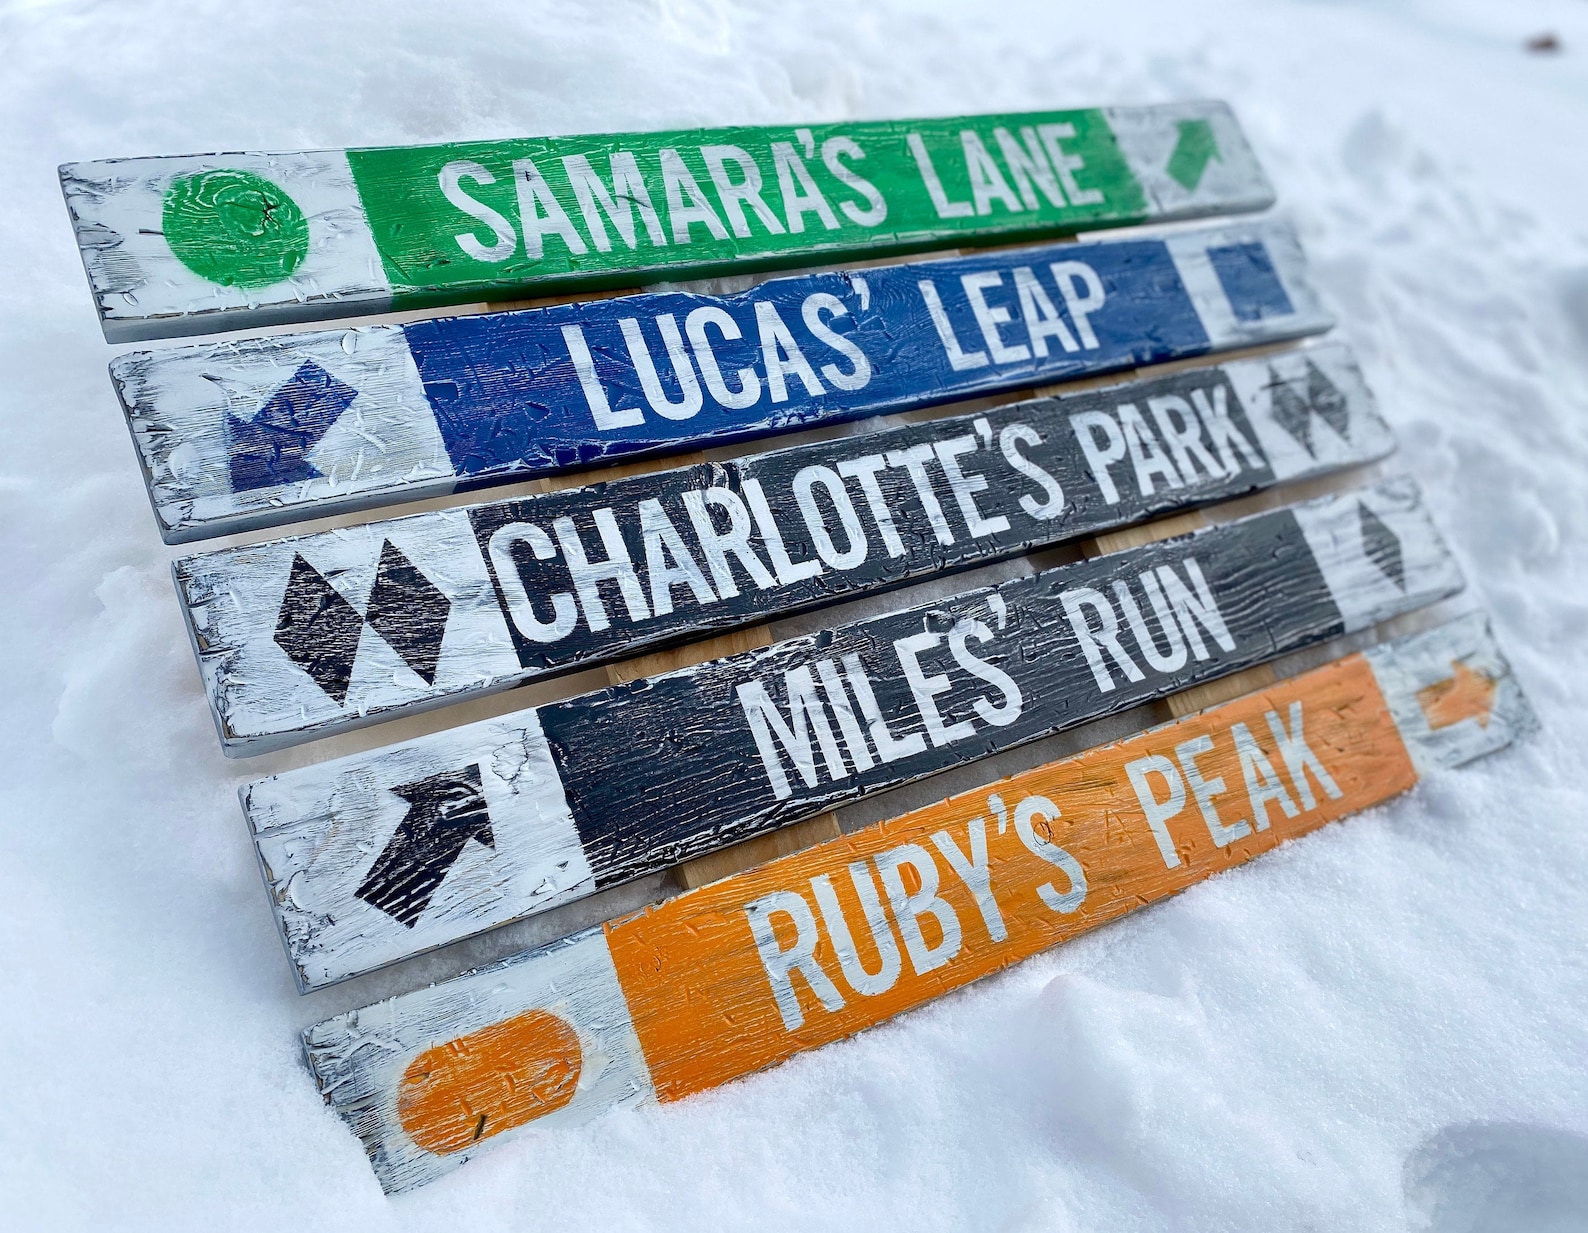 5. Personalized Rustic Ski and Snowboard Trail Signs